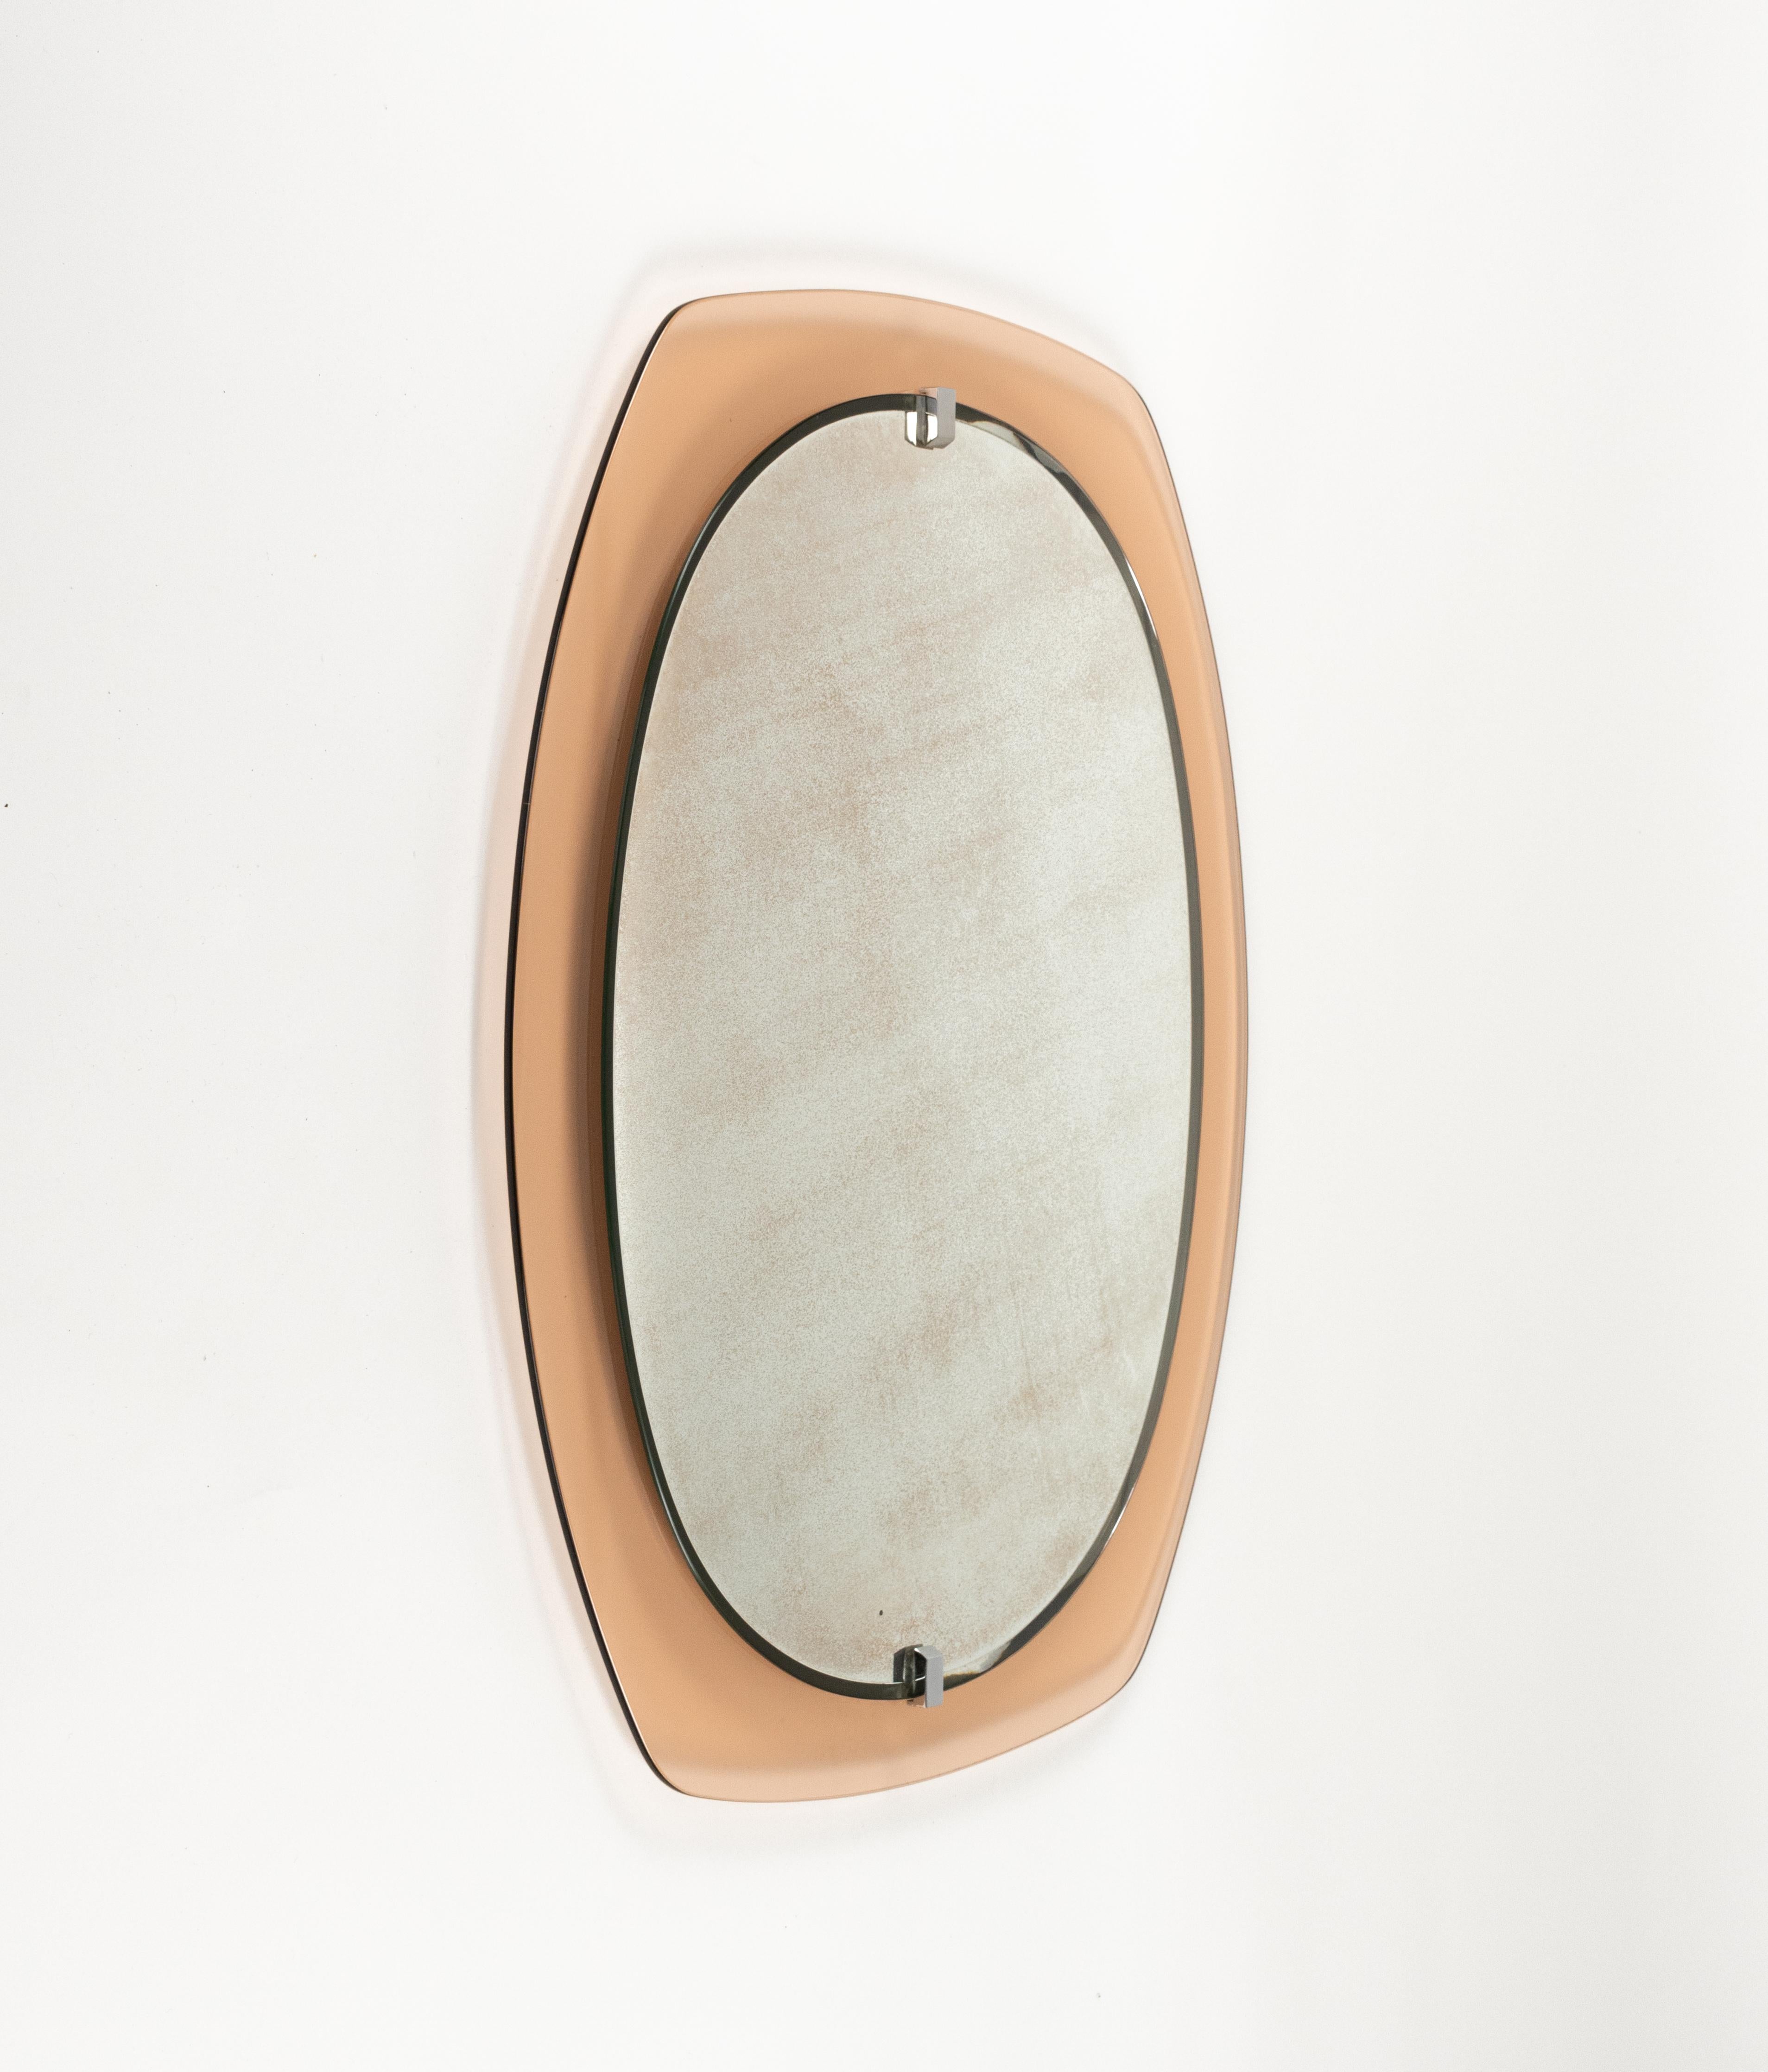 Italian Midcentury Glass Pink Oval Wall Mirror by Veca, Italy 1970s For Sale